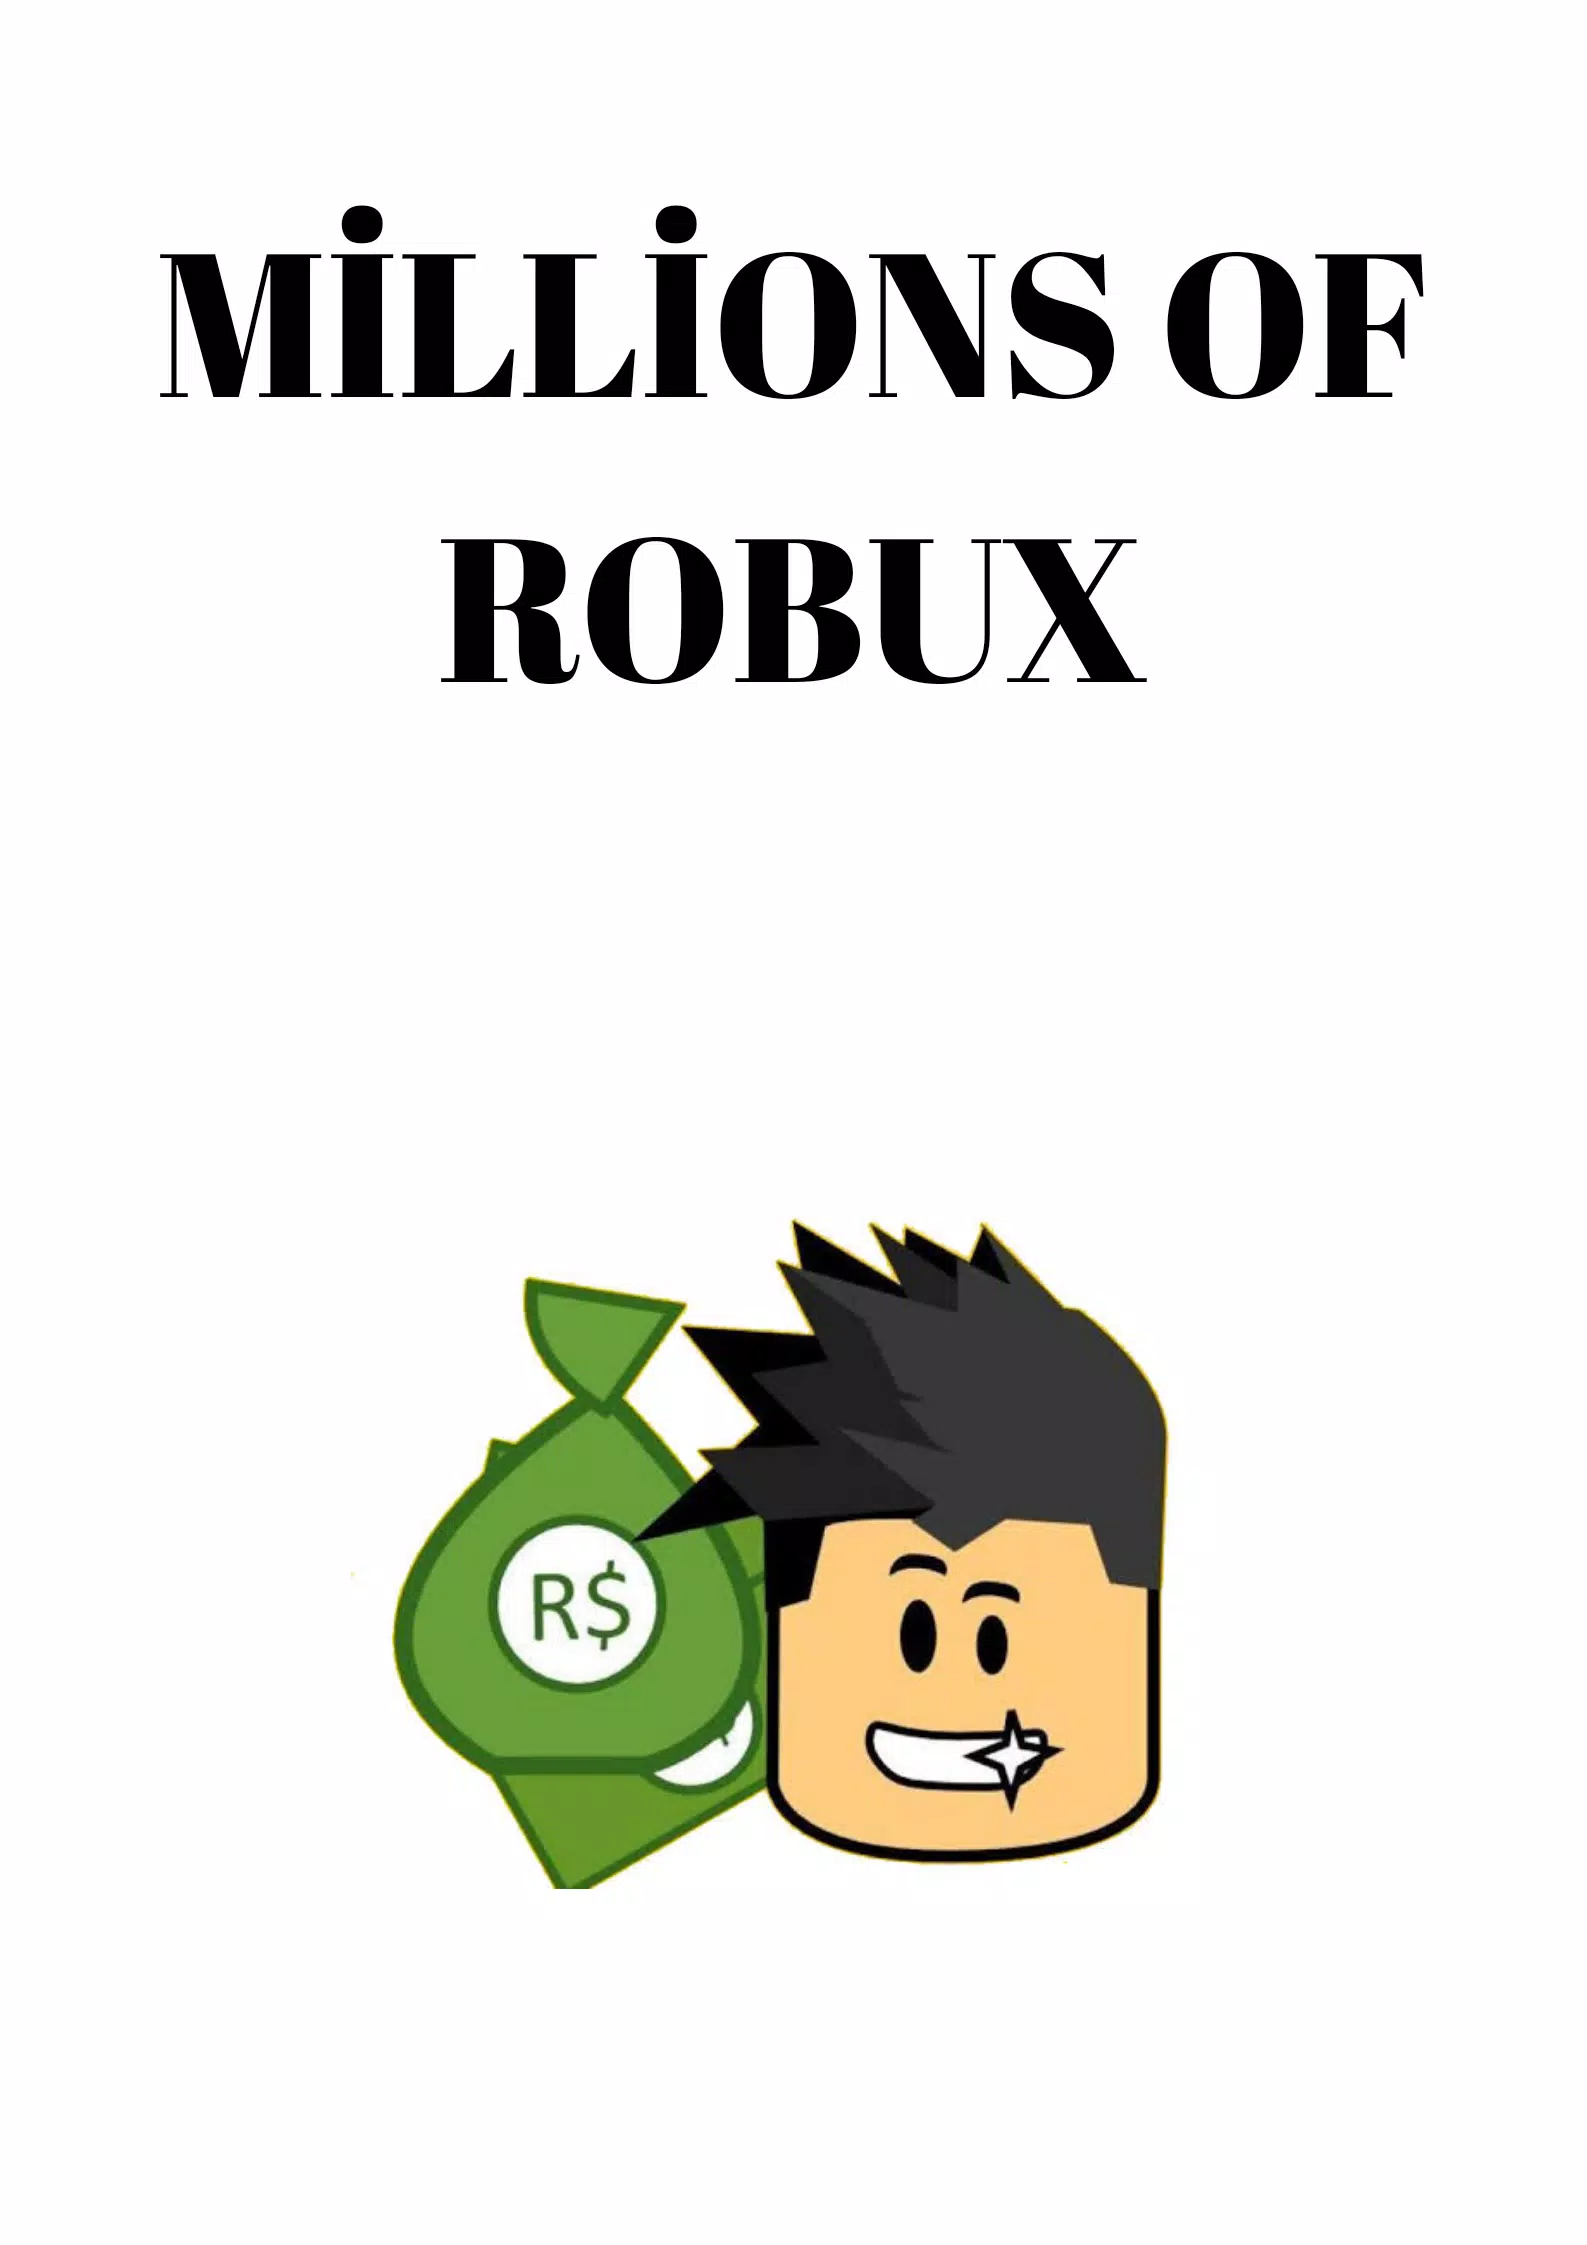 FREE ROBUX* HOW TO GET FREE ROBUX IN ROBLOX (2020) 